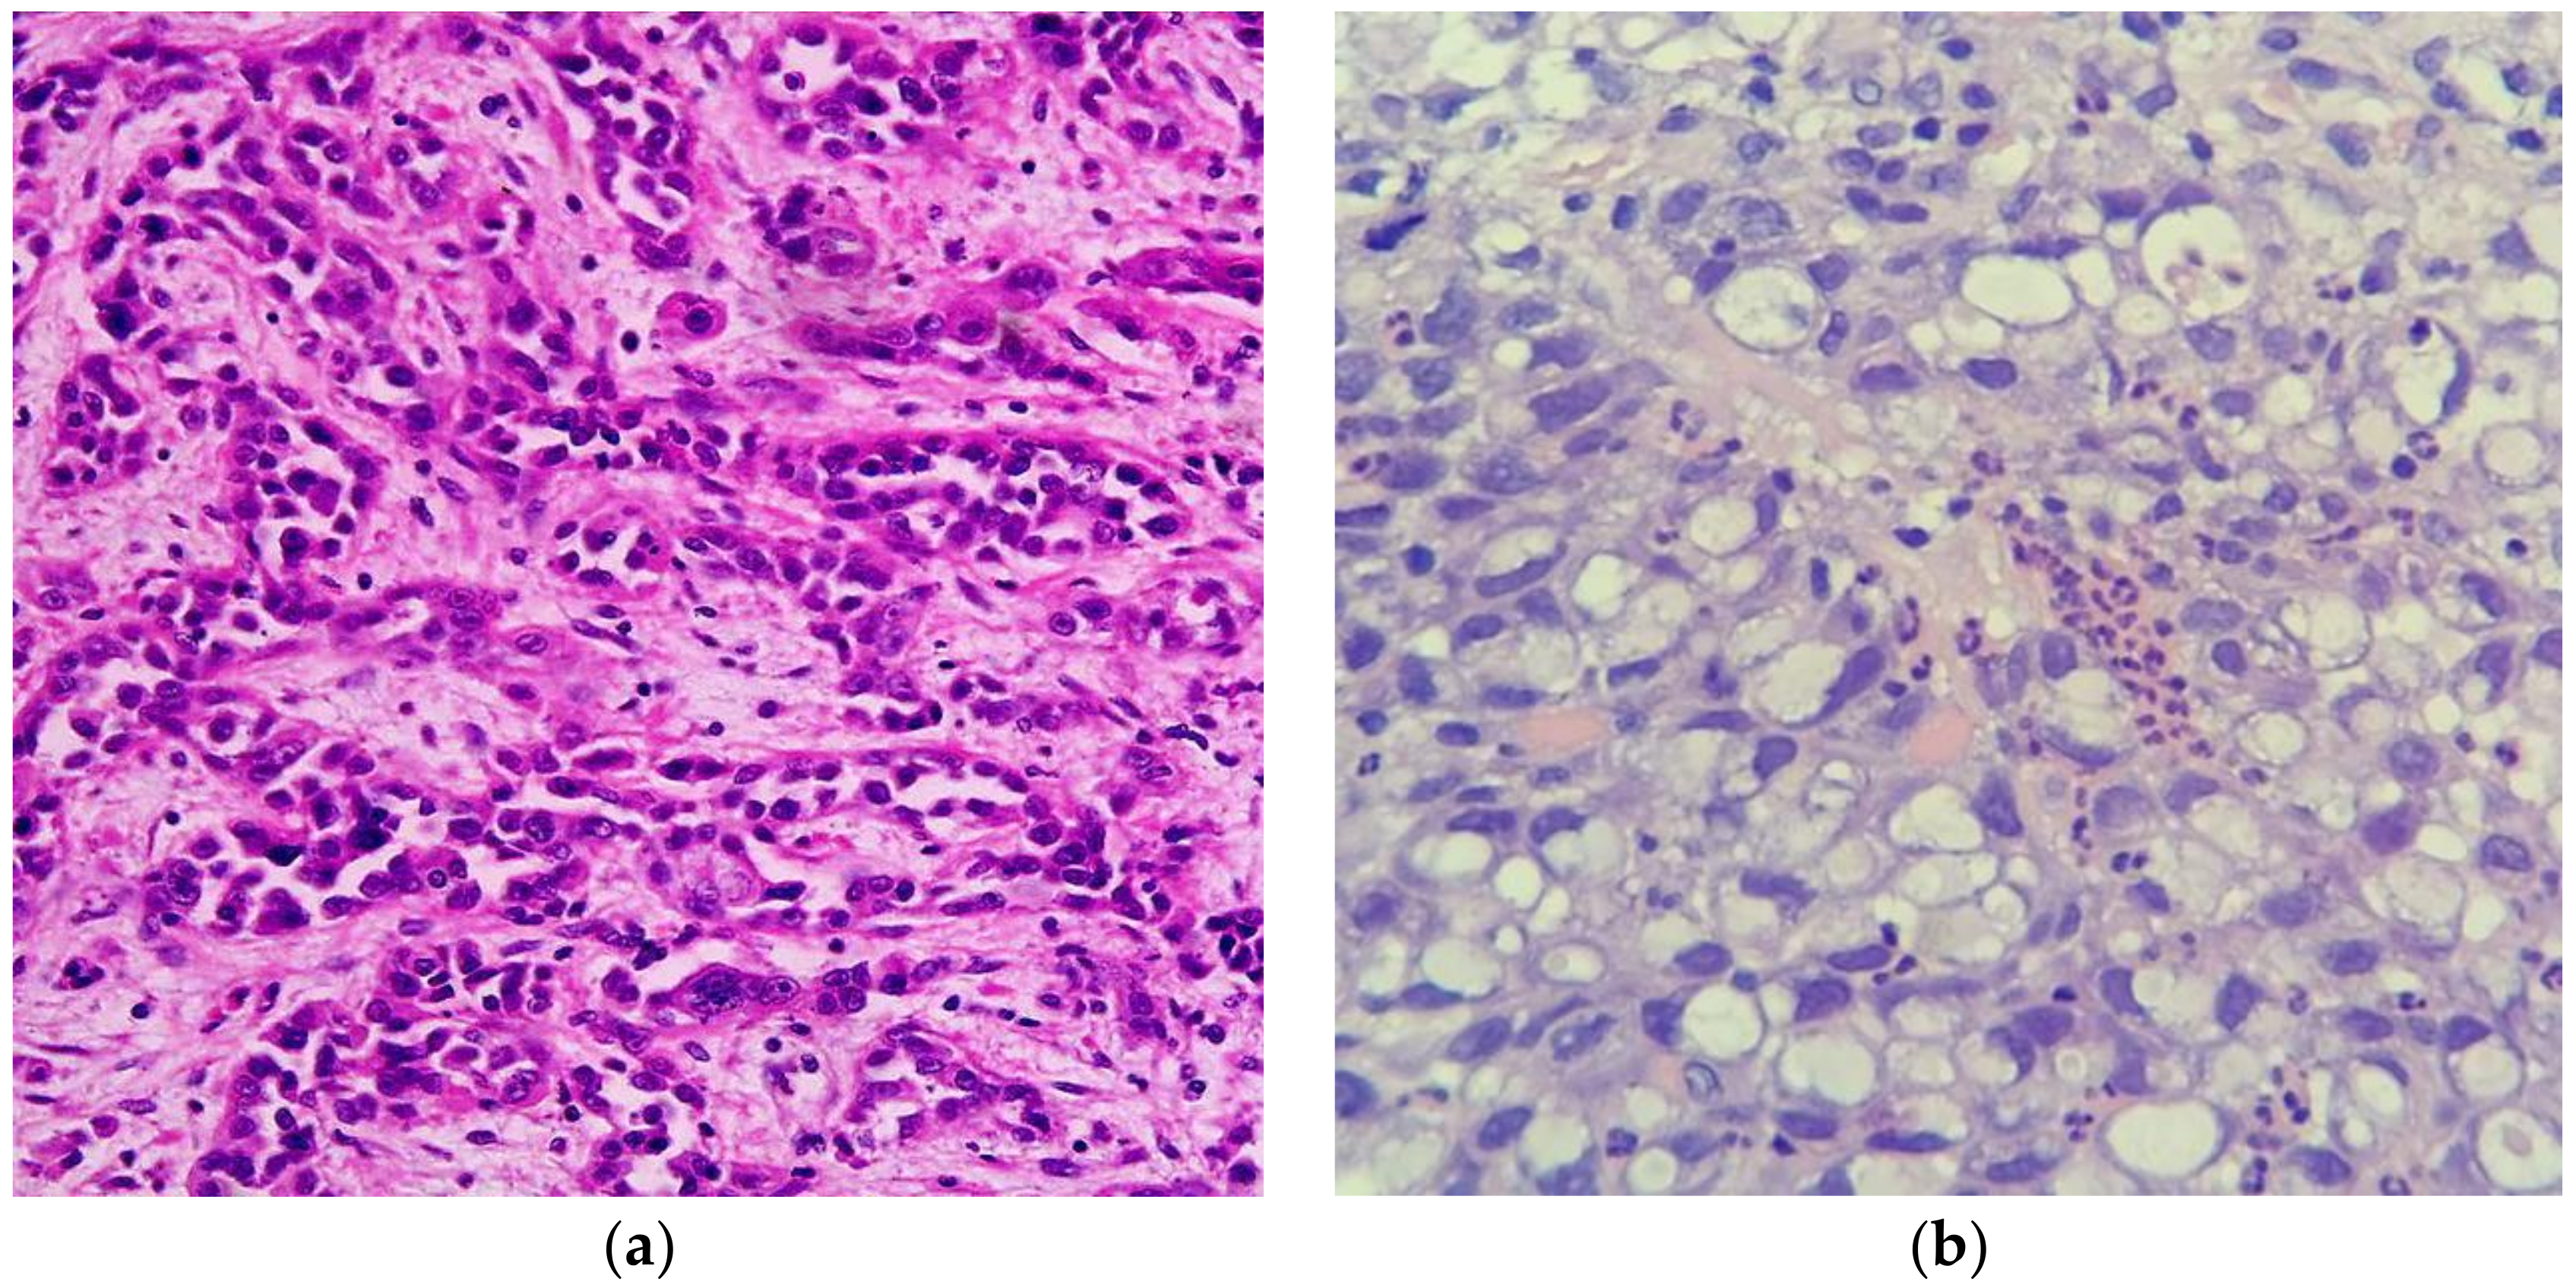 Clinicopathologic and molecular features of sporadic early-onset colorectal  adenocarcinoma: an adenocarcinoma with frequent signet ring cell  differentiation, rectal and sigmoid involvement, and adverse morphologic  features - Modern Pathology